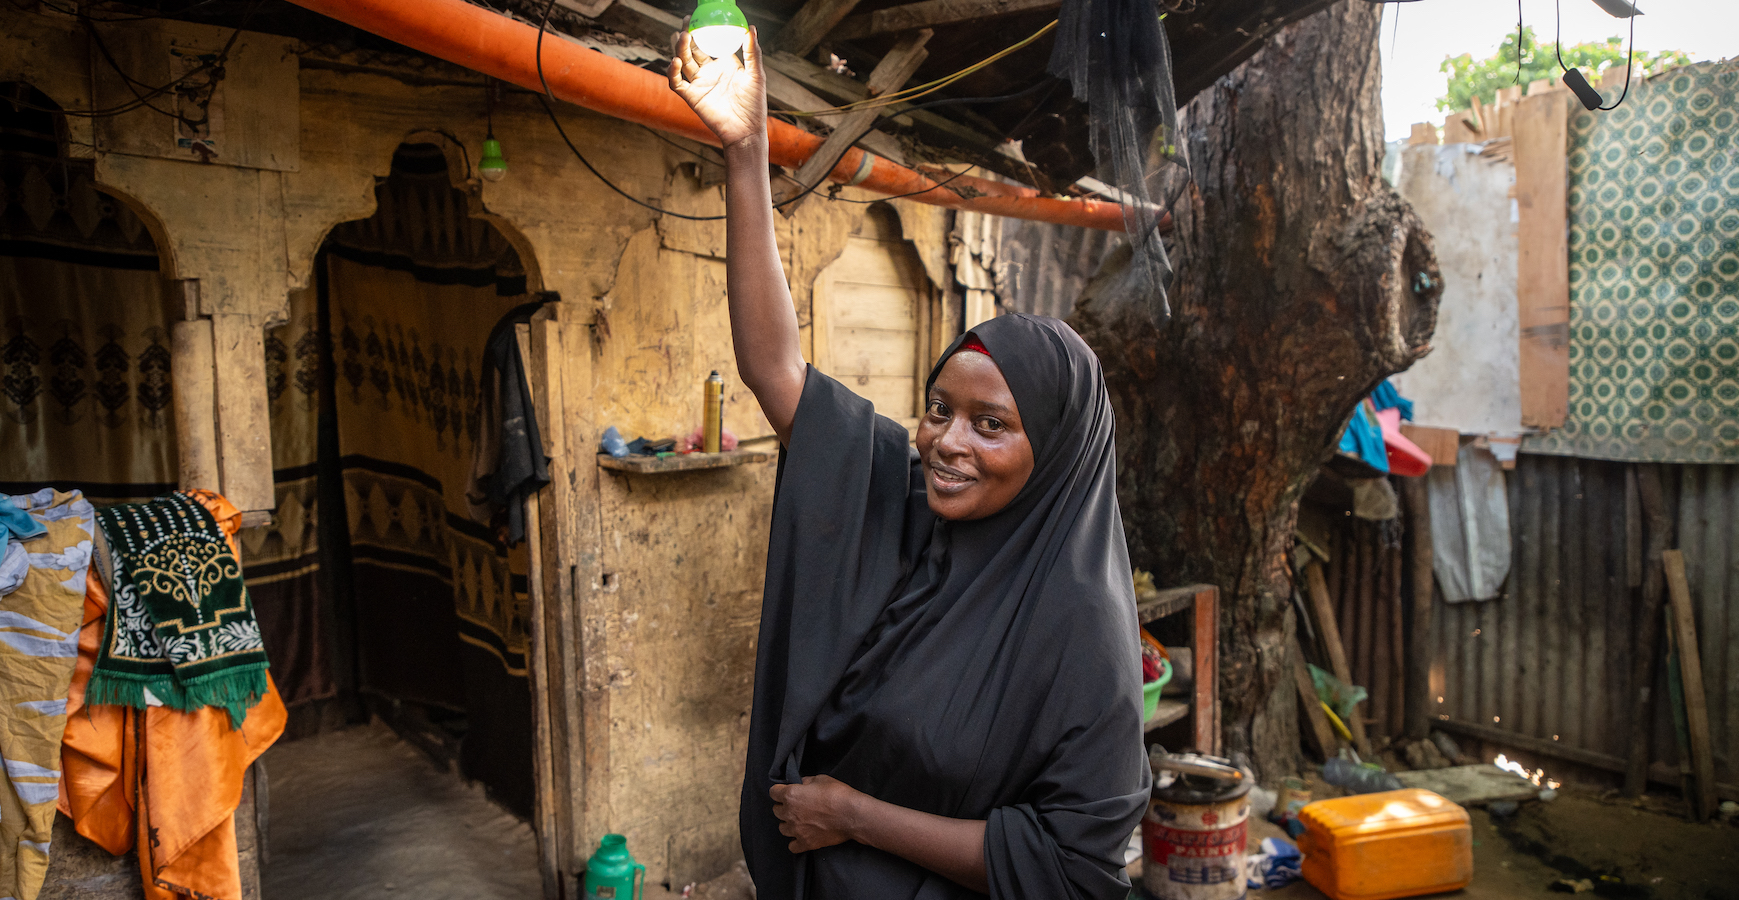 Idil* turning on the solar light she received as part of the Green graduation programme by Concern. (Photo: Mustafa Saeed/Concern Worldwide)